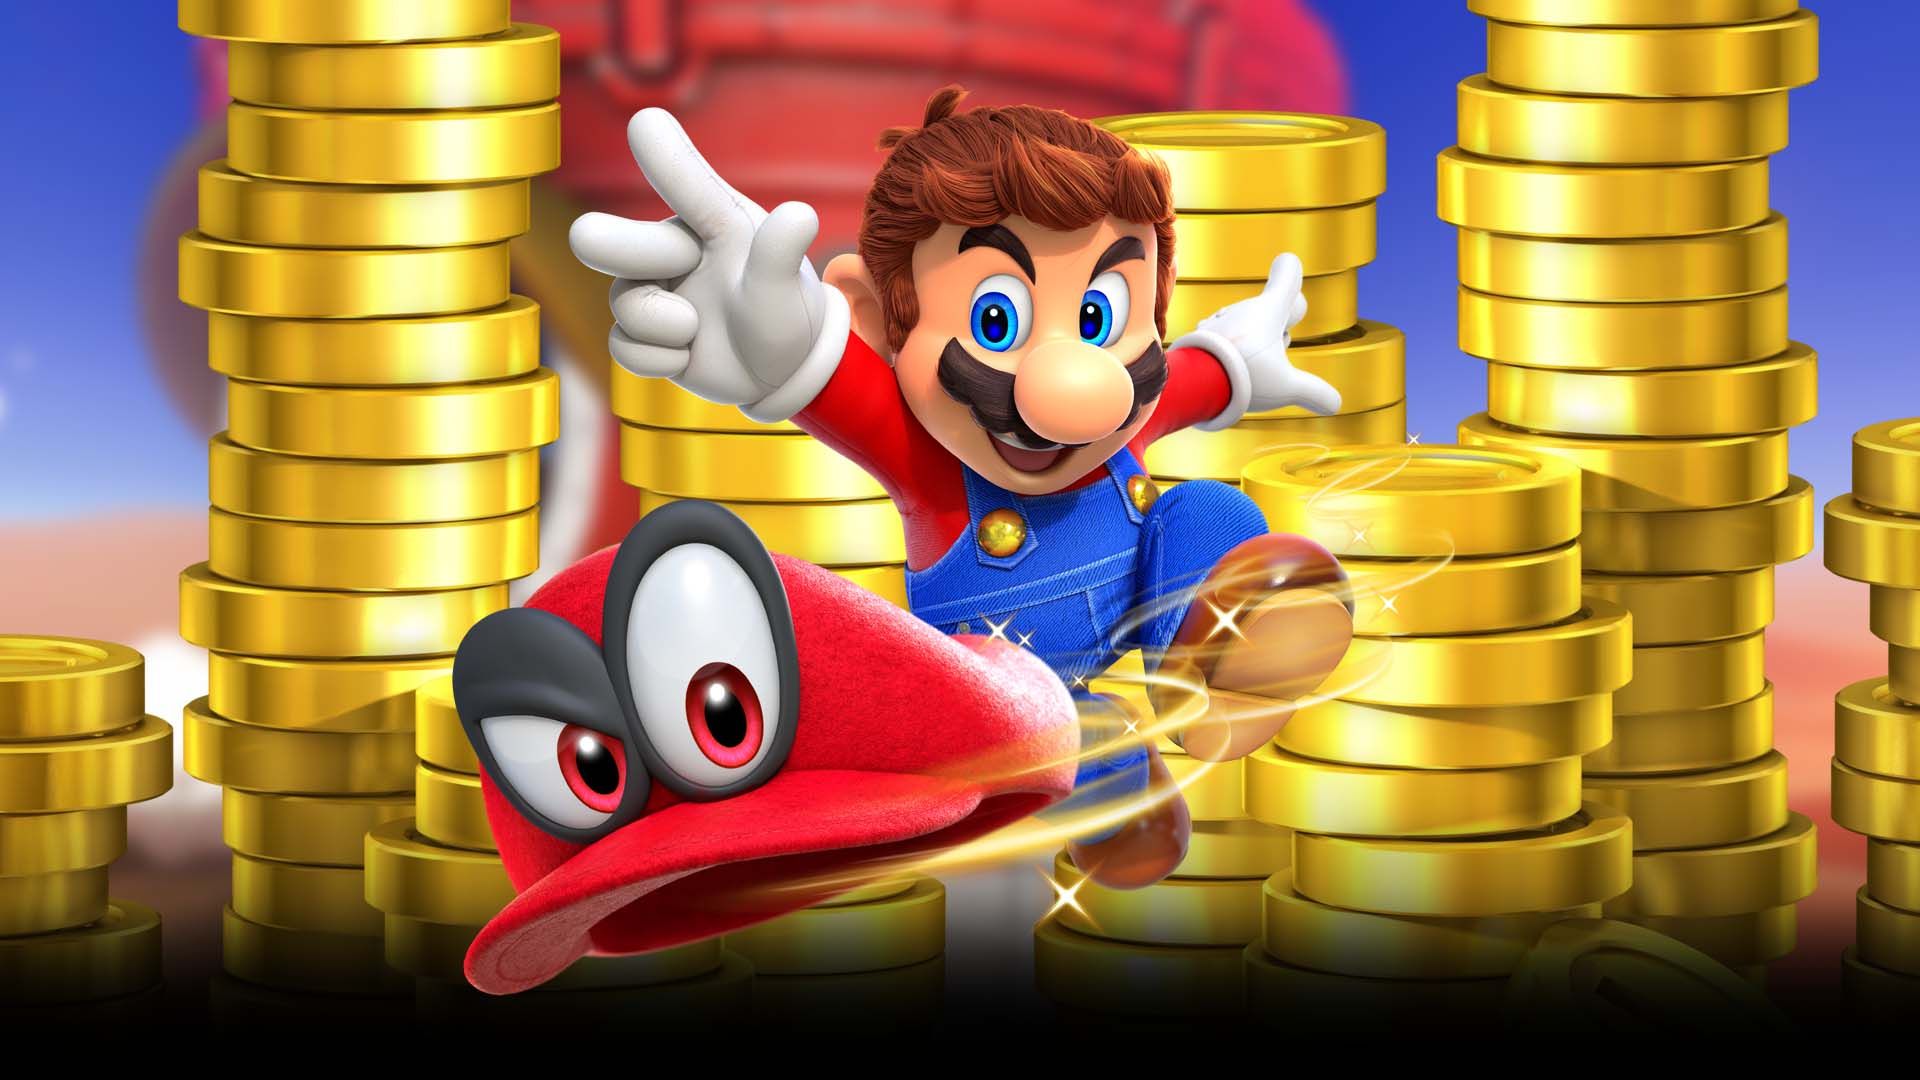 Super Mario Odyssey is the fastest-selling Mario game in the U.S. - Polygon